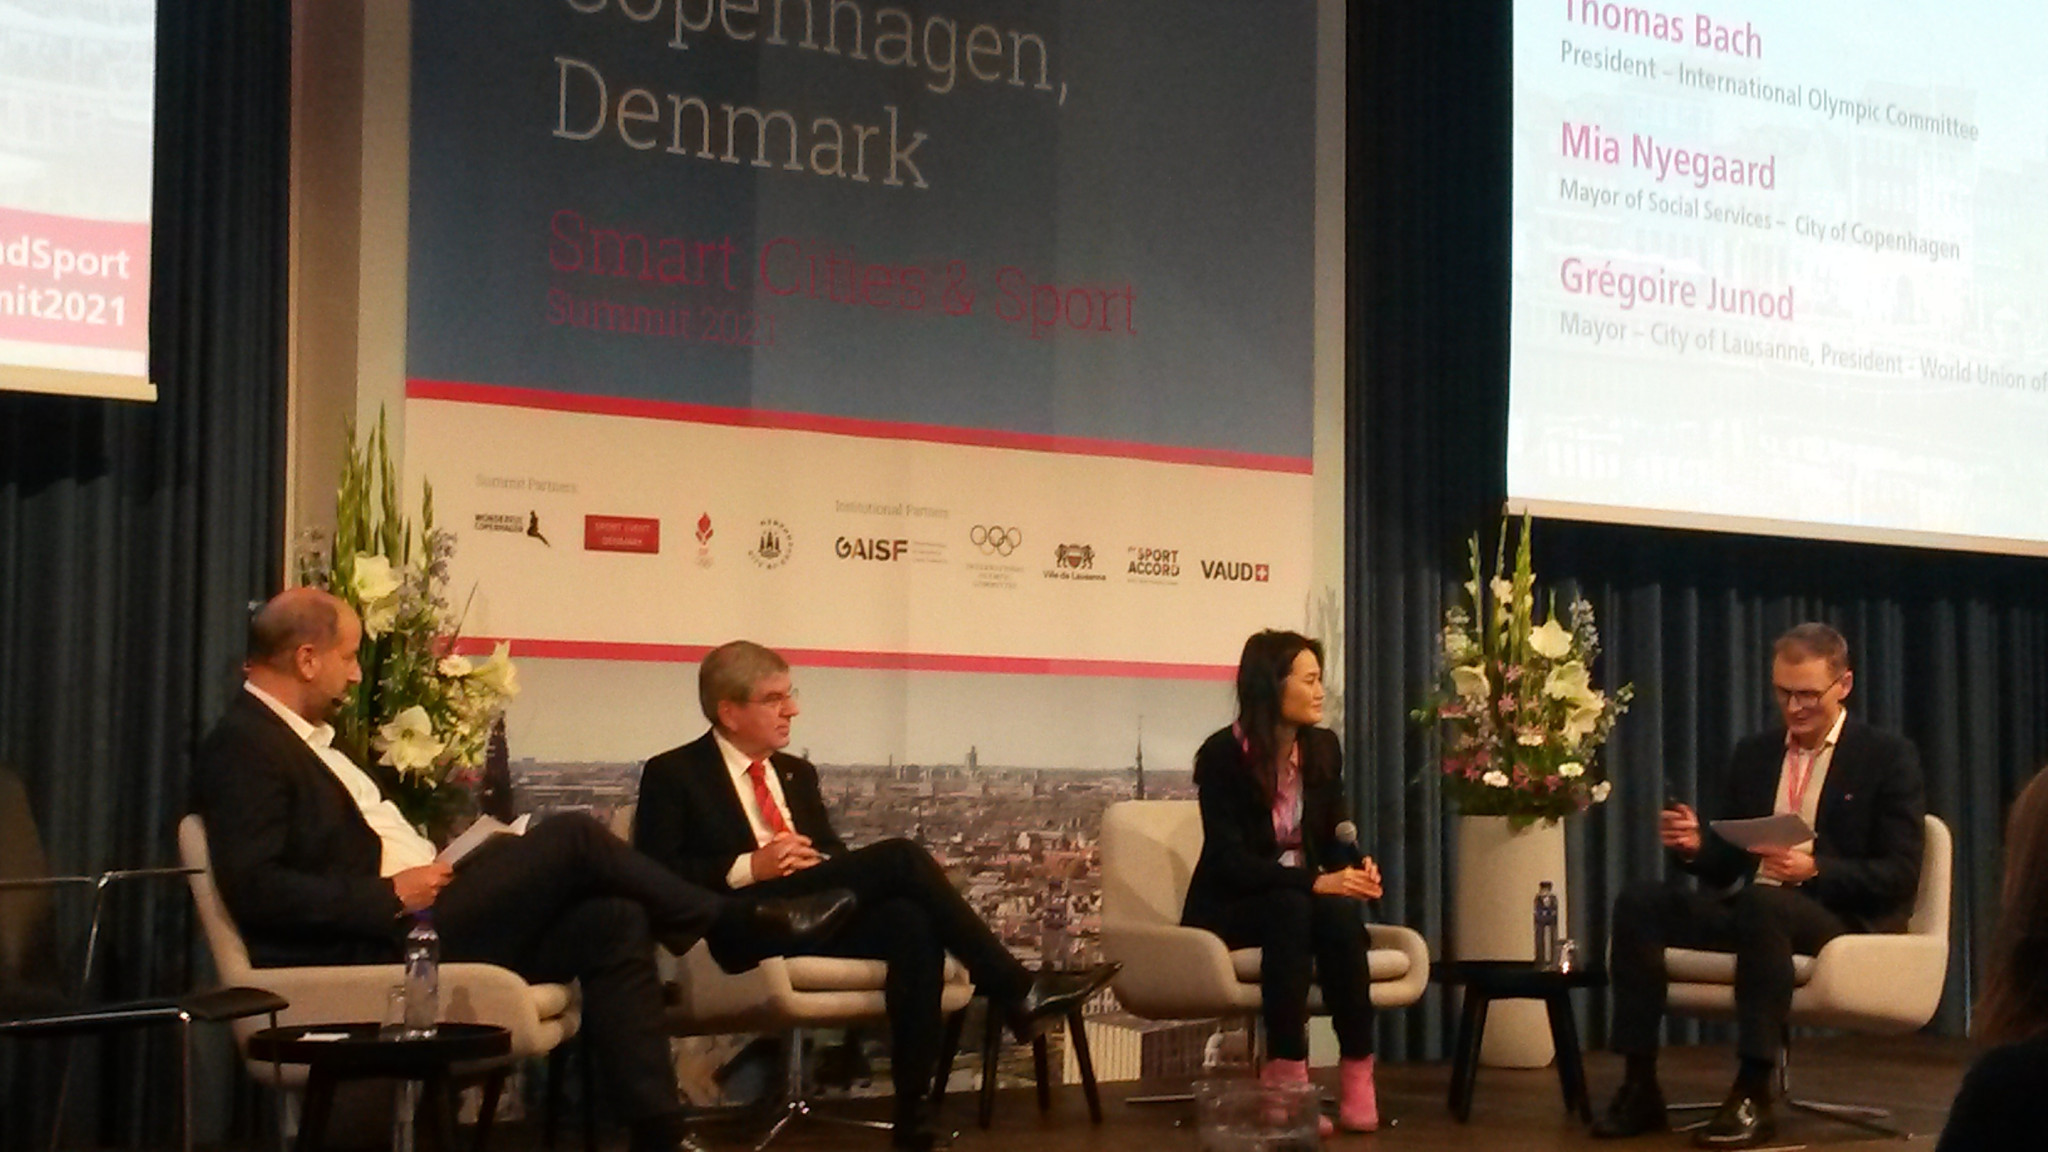 Mia Nyegaard, who will become Copenhagen's Mayor for Culture, Leisure and Sport in January, used the Smart Cities & Sport Summit attended by IOC President Thomas Bach to float the idea of the Danish capital hosting a Youth Olympics ©ITG